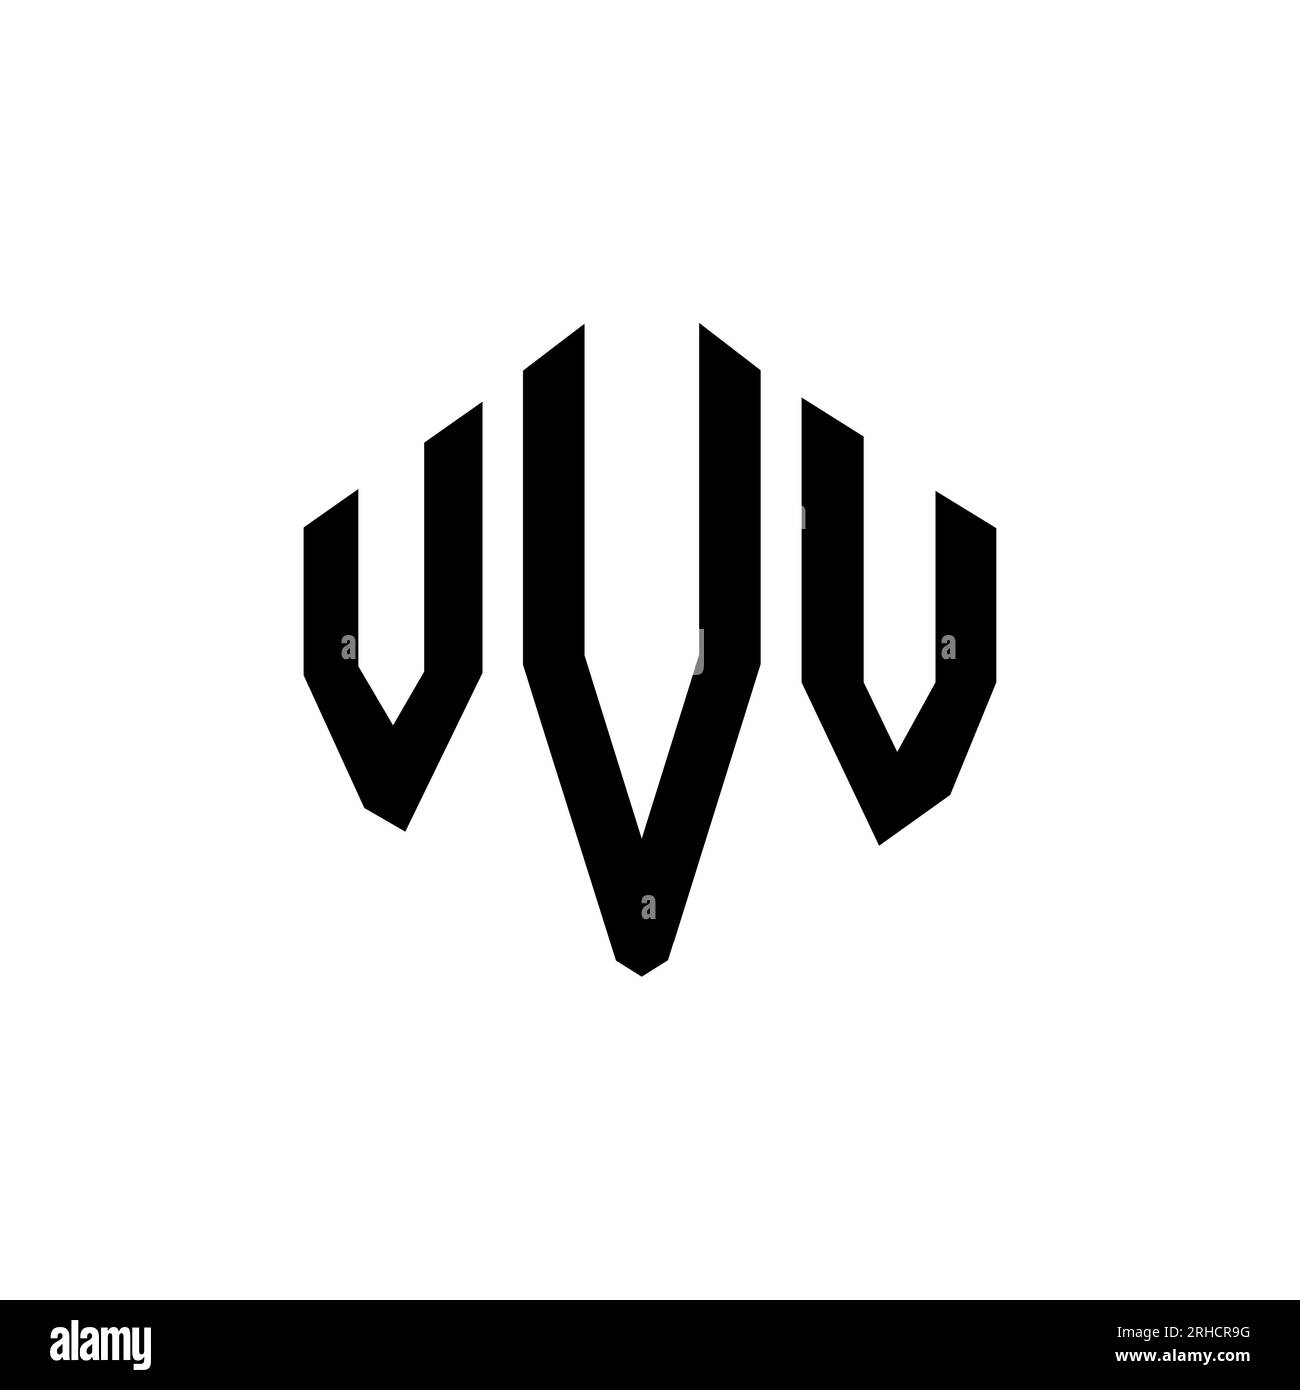 Vl logo Cut Out Stock Images & Pictures - Alamy